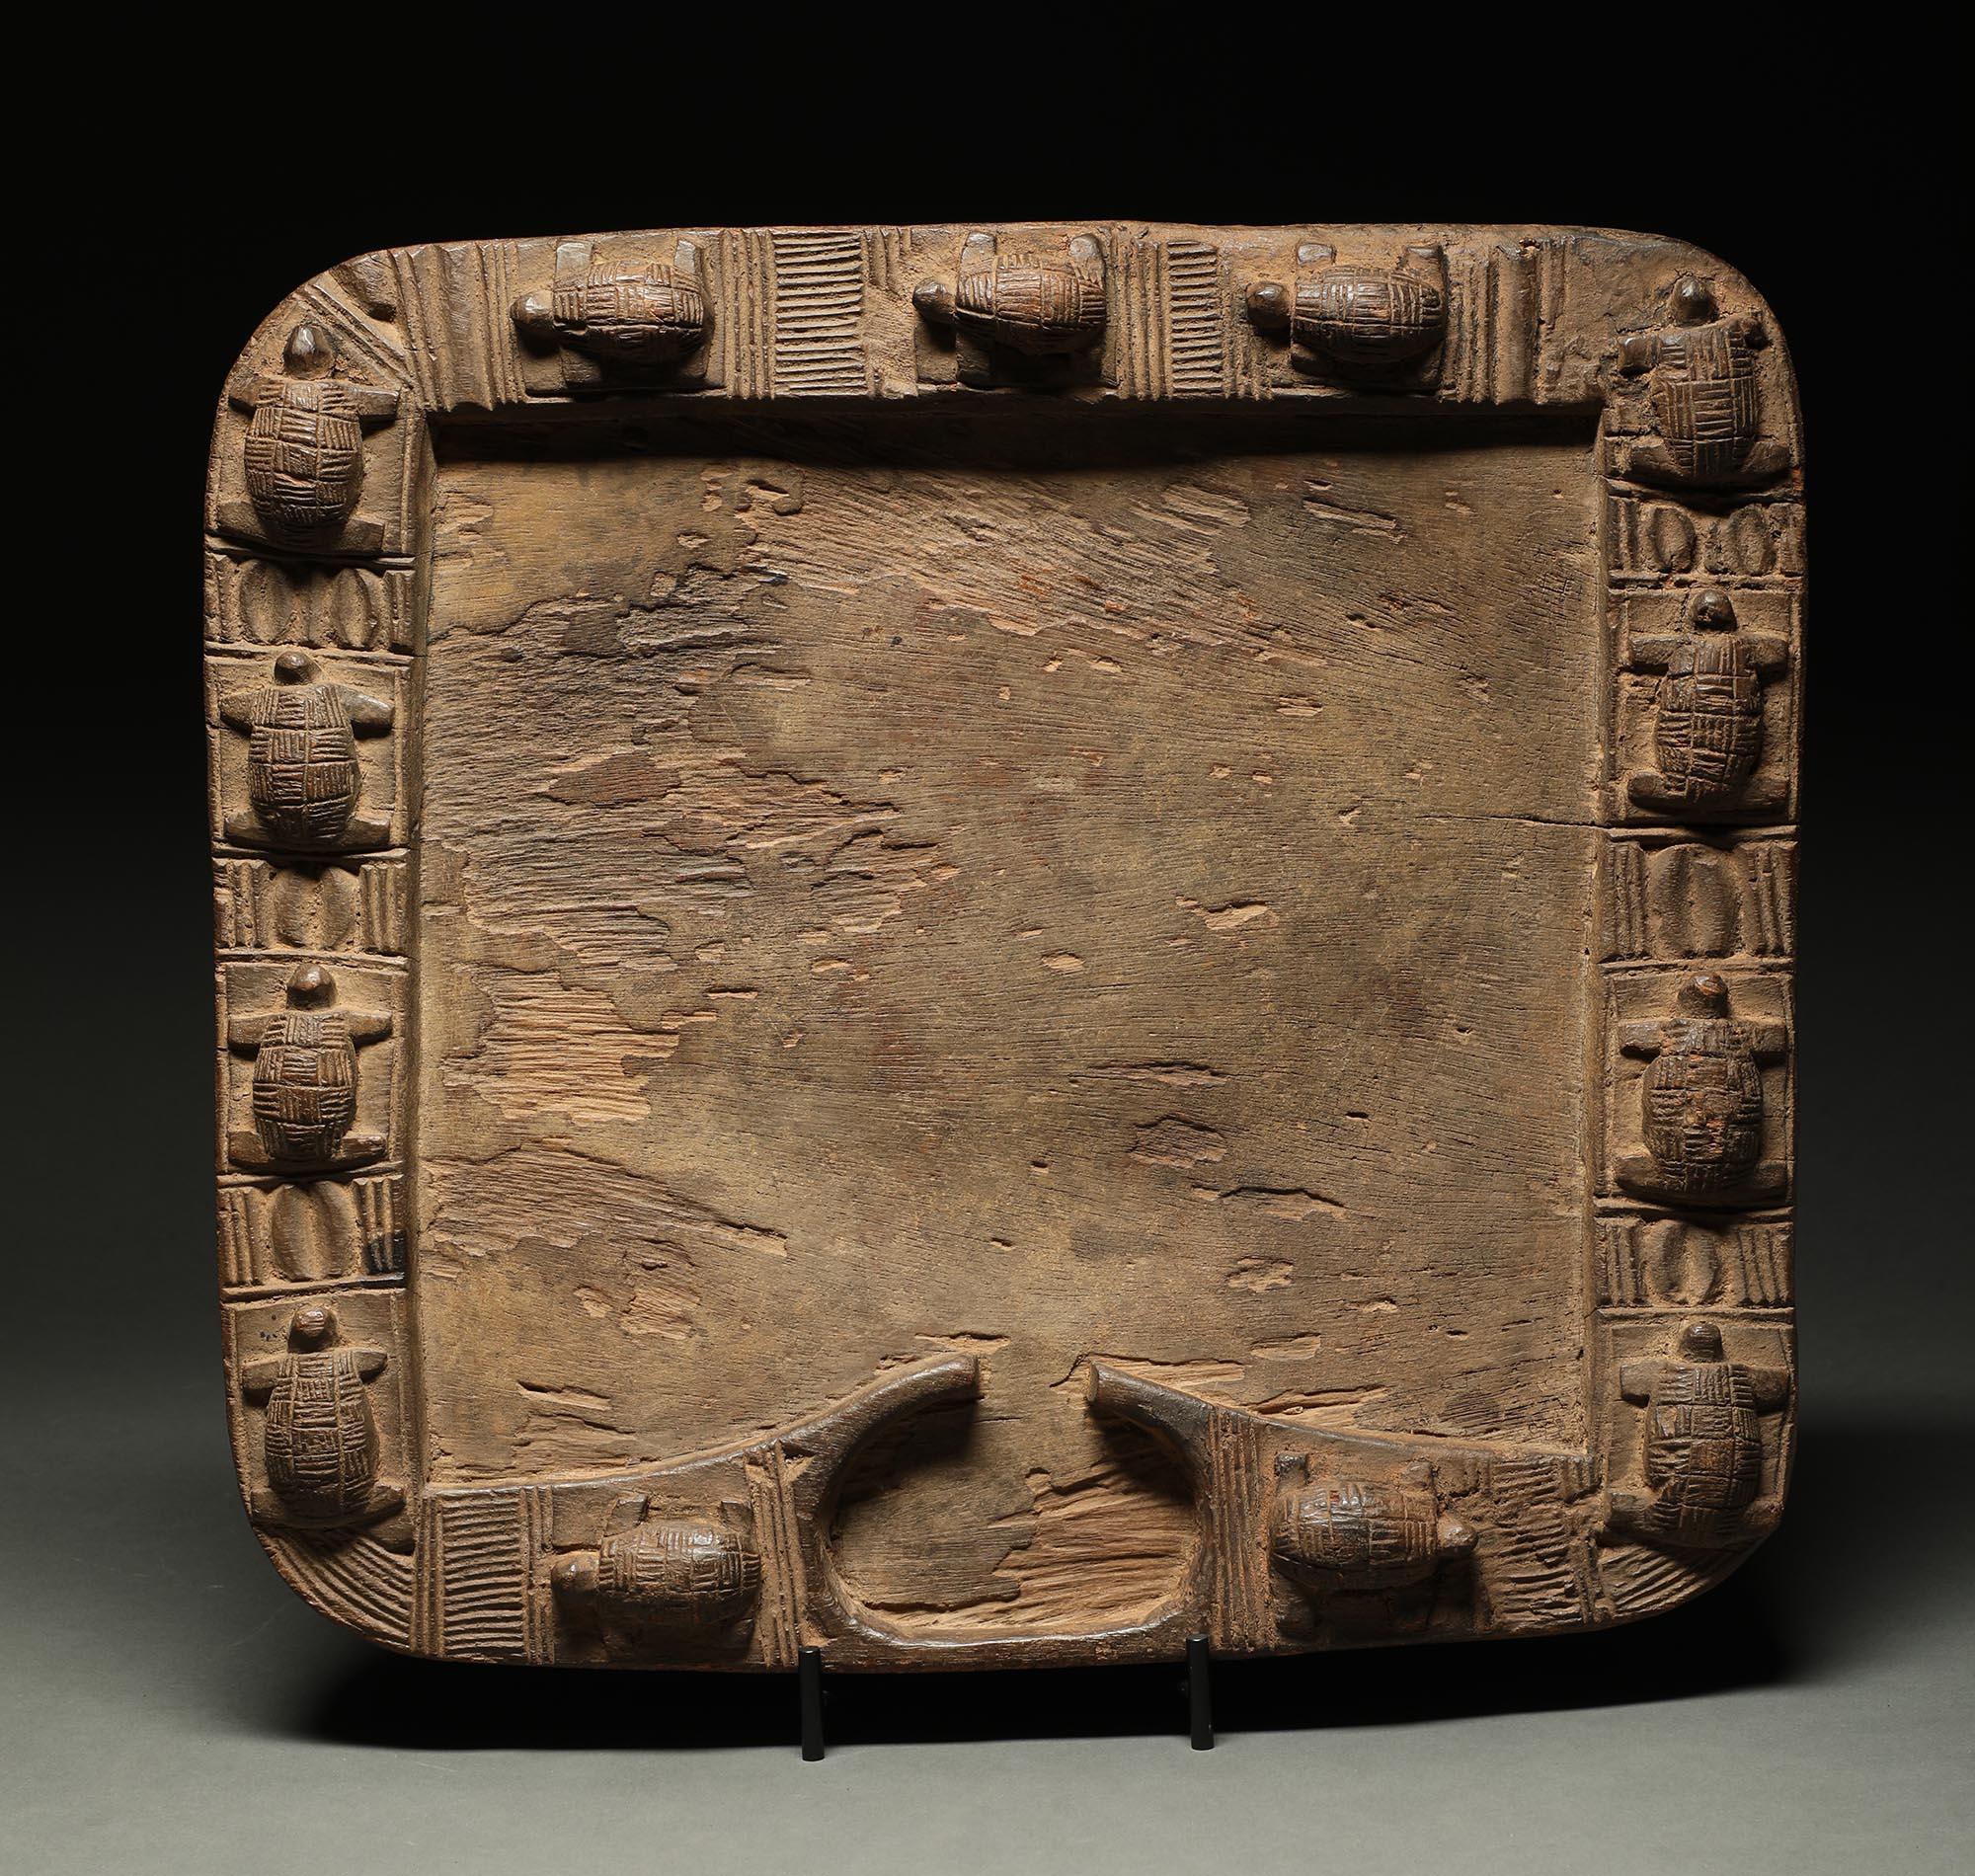 Very early Yoruba divination board, a rare example with a row of turtles going around the edge of the board. Tilts slightly forward with two short legs on bottom. Carved receptacle on bottom to hold divination pieces. Very dense, heavy wood. Early